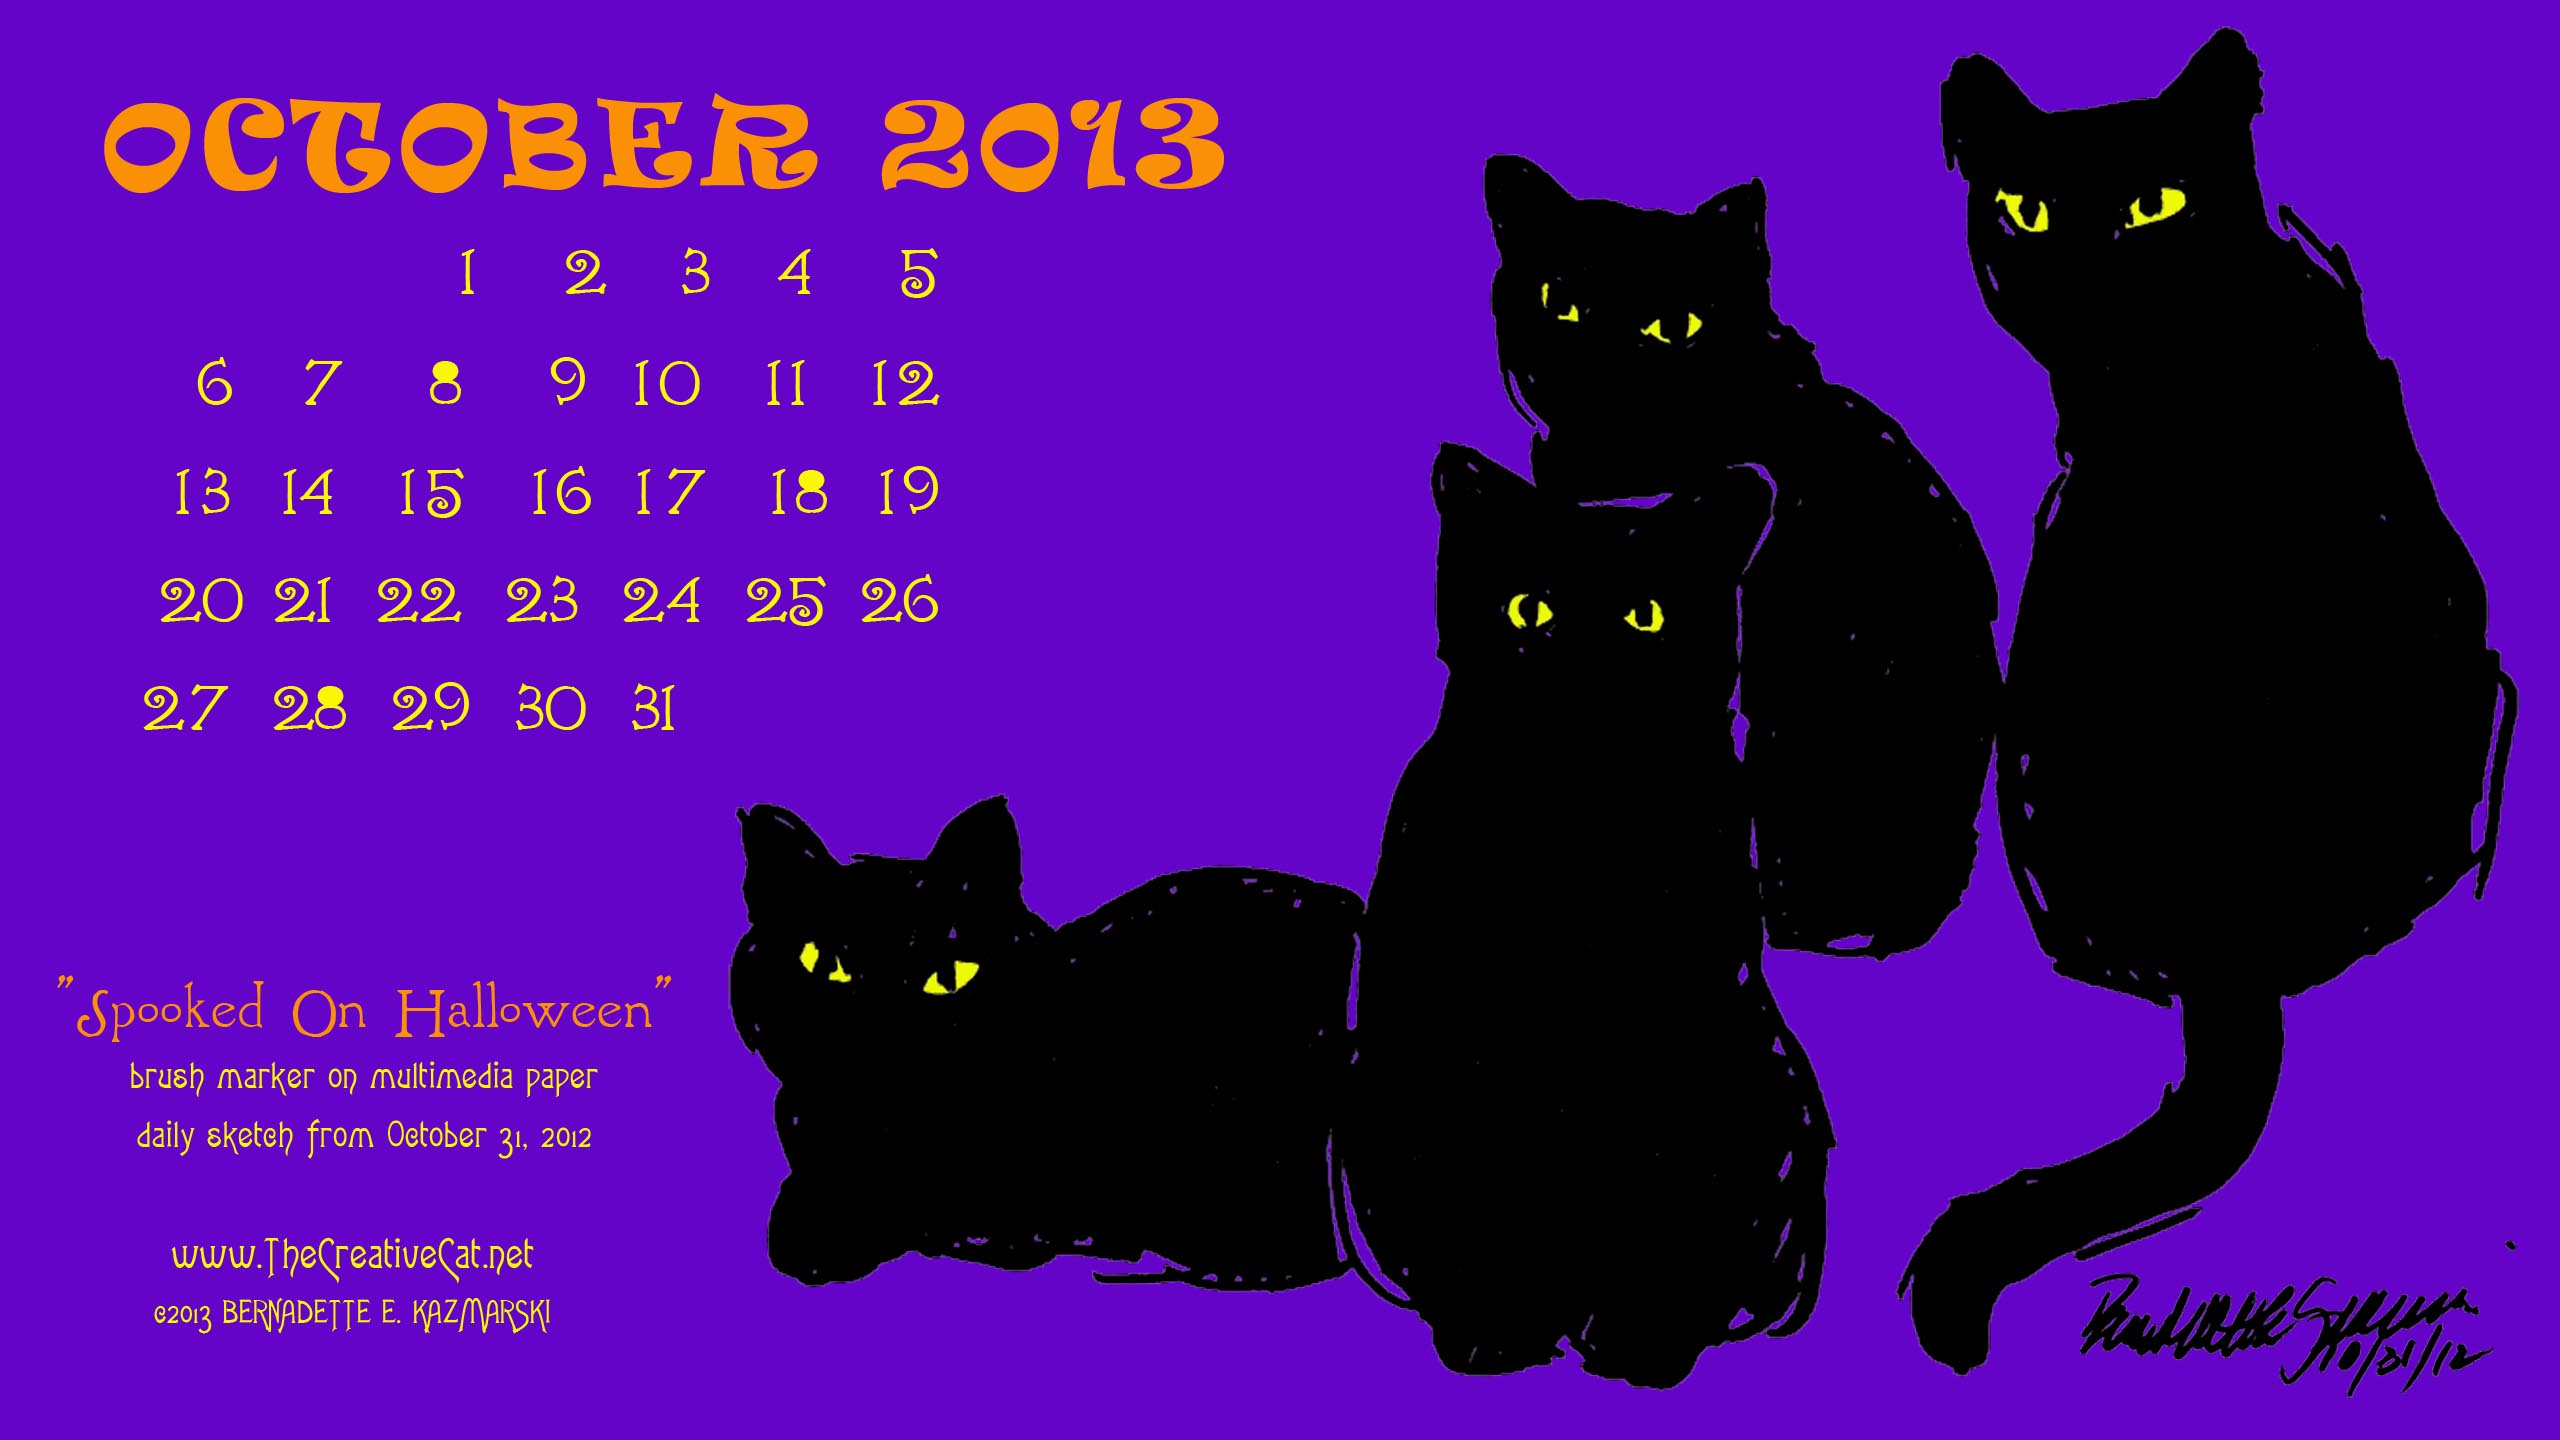 "Spooked on Halloween" desktop calendar for wide and HD monitors.